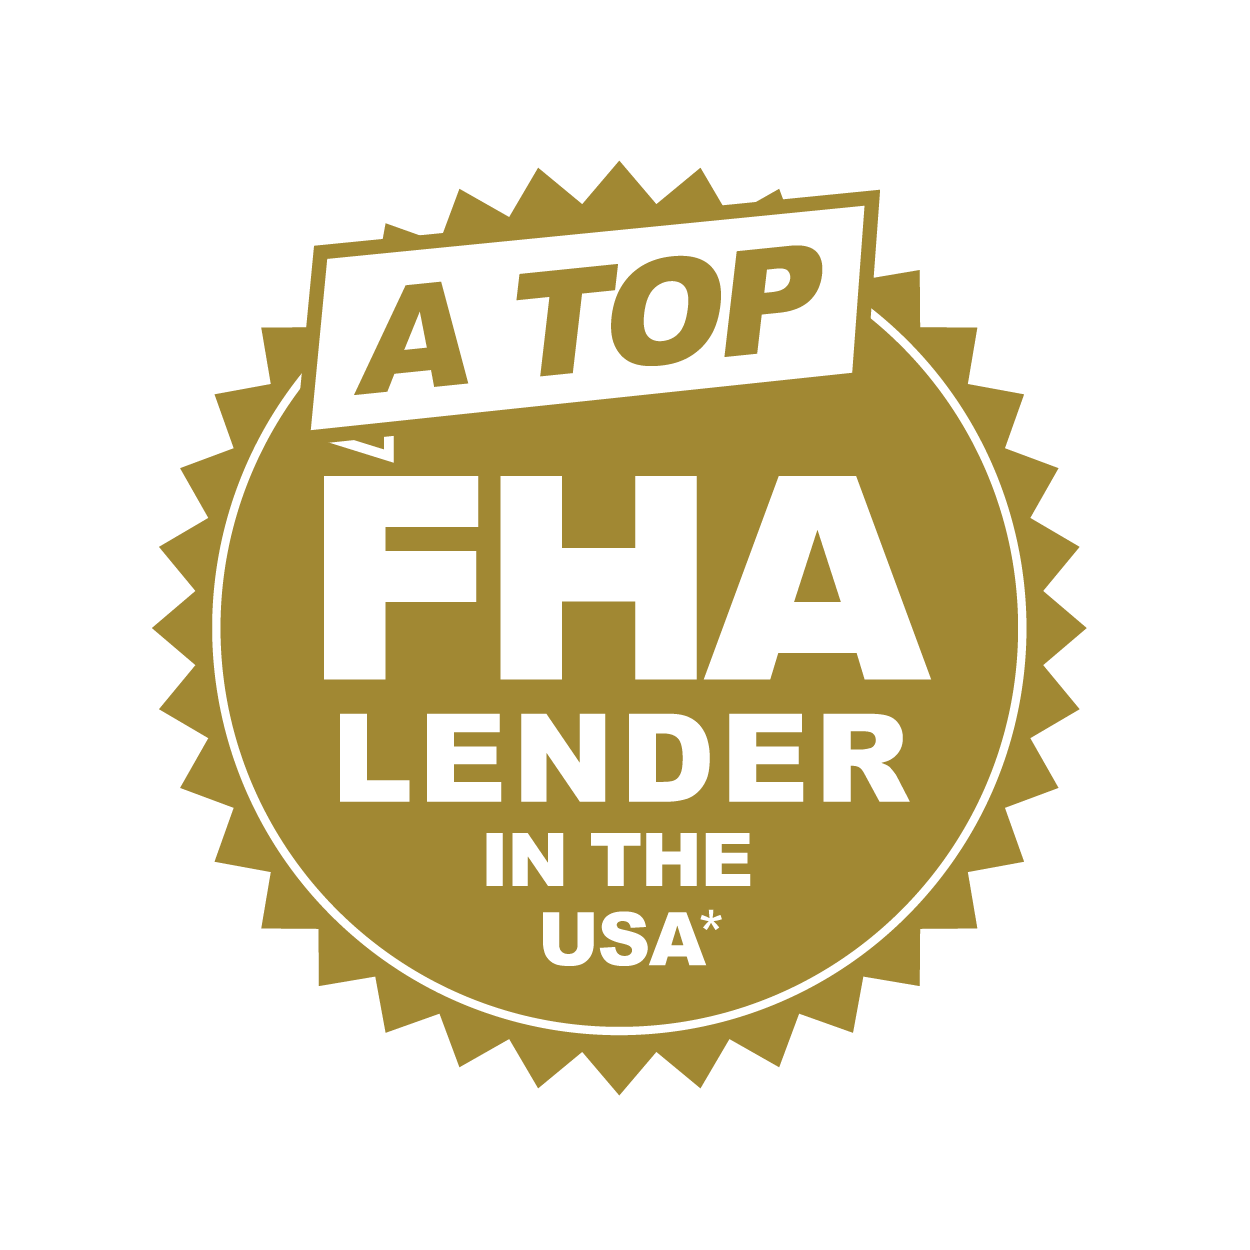 Number 1 FHA Lender in the USA